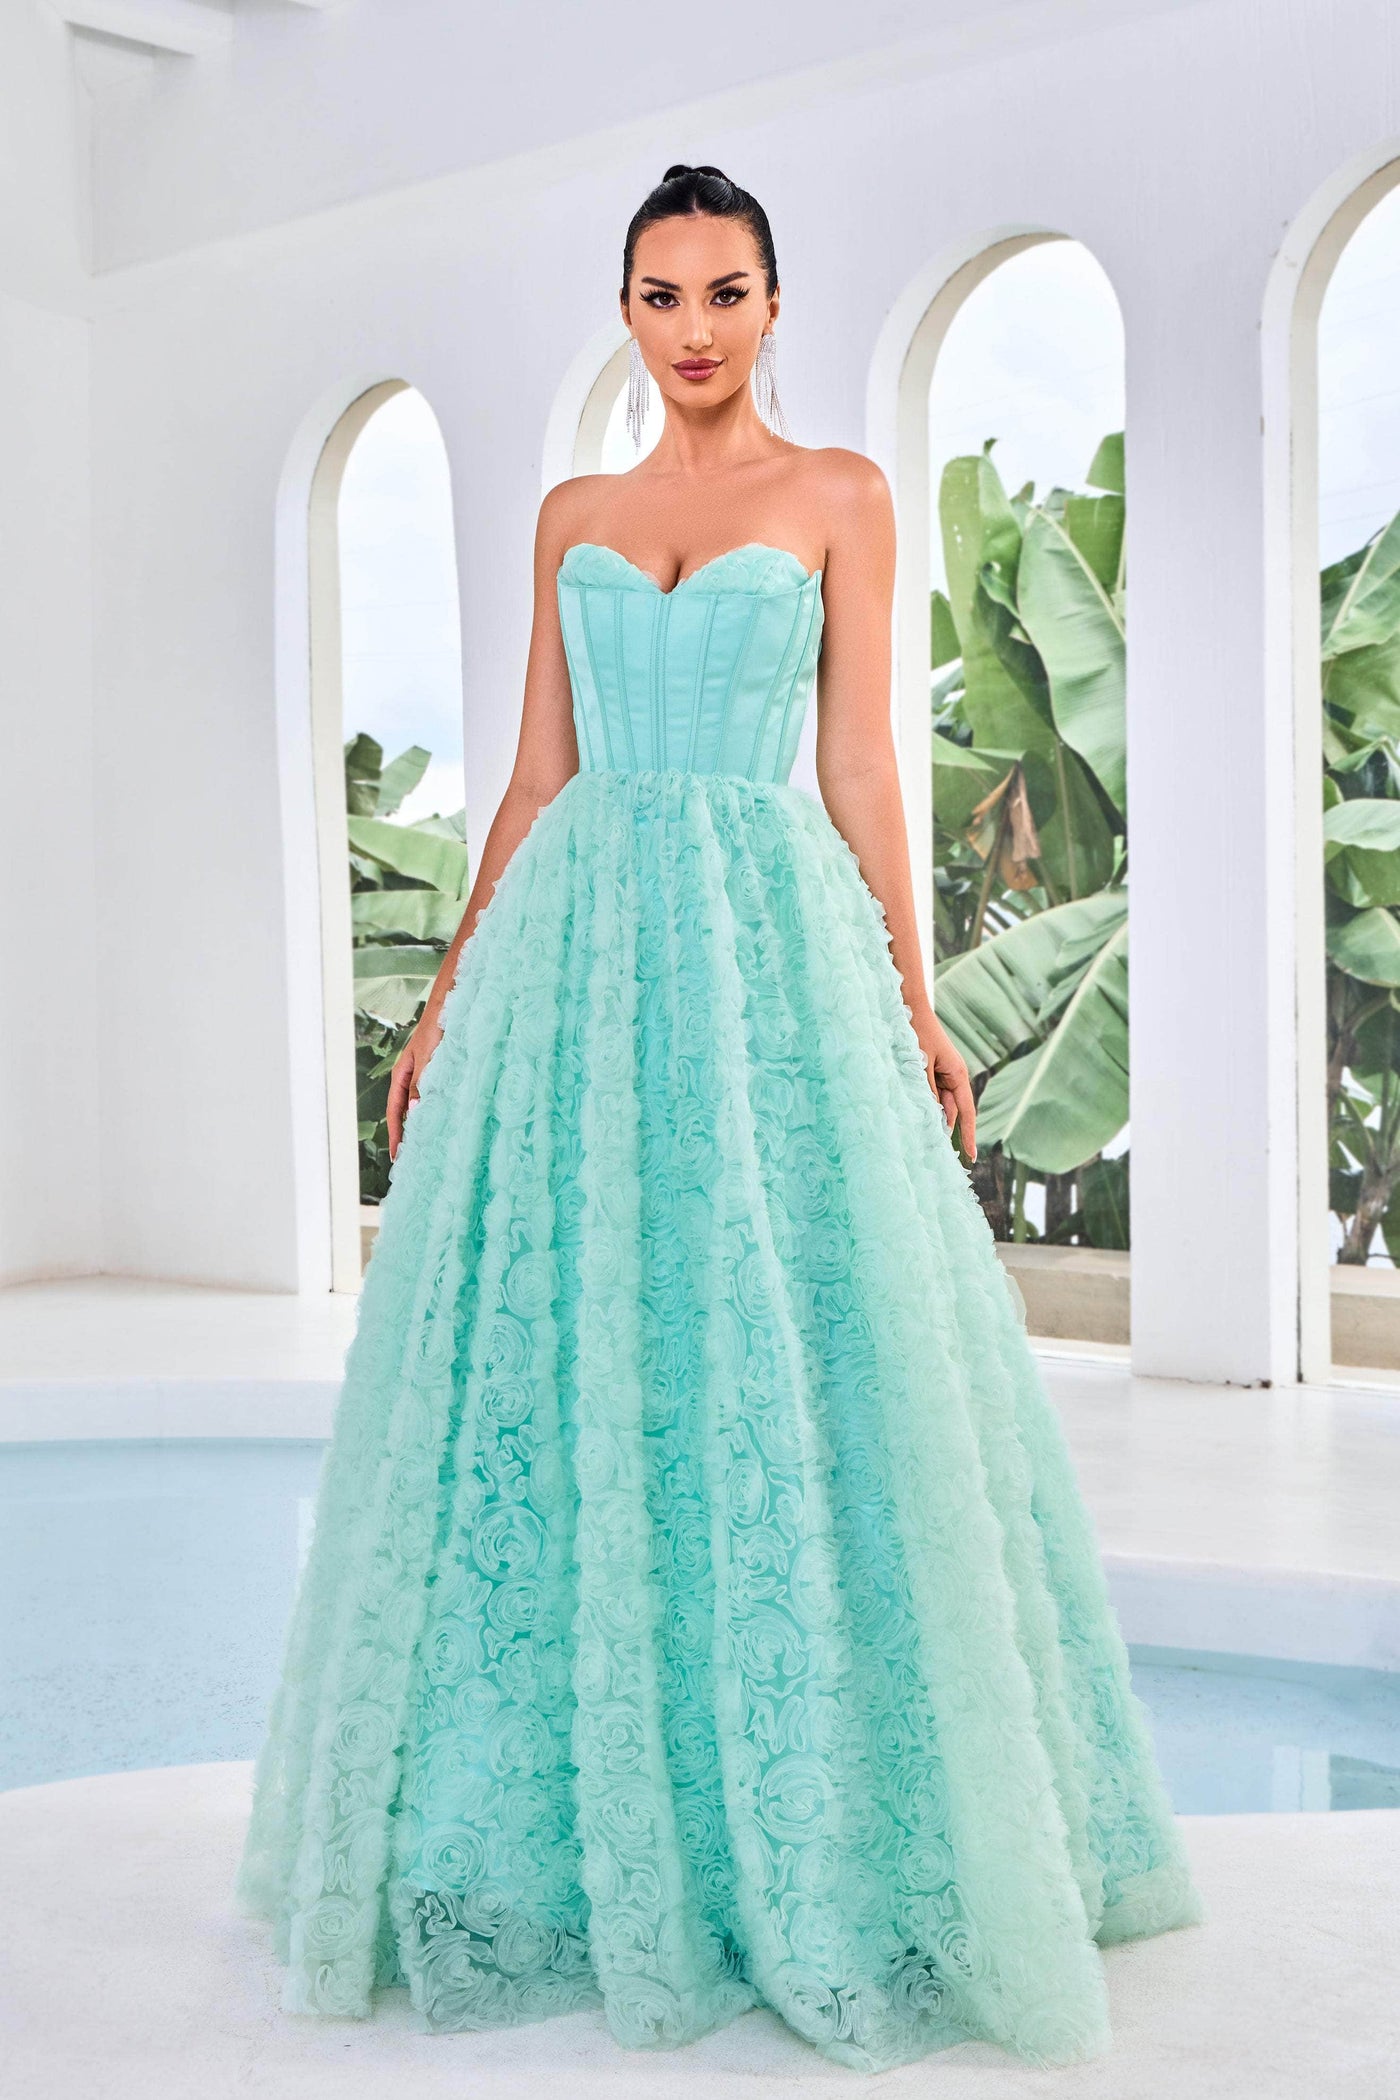 J'Adore Dresses J24045 - Sweetheart Ruffled Evening Gown Special Occasion Dresses